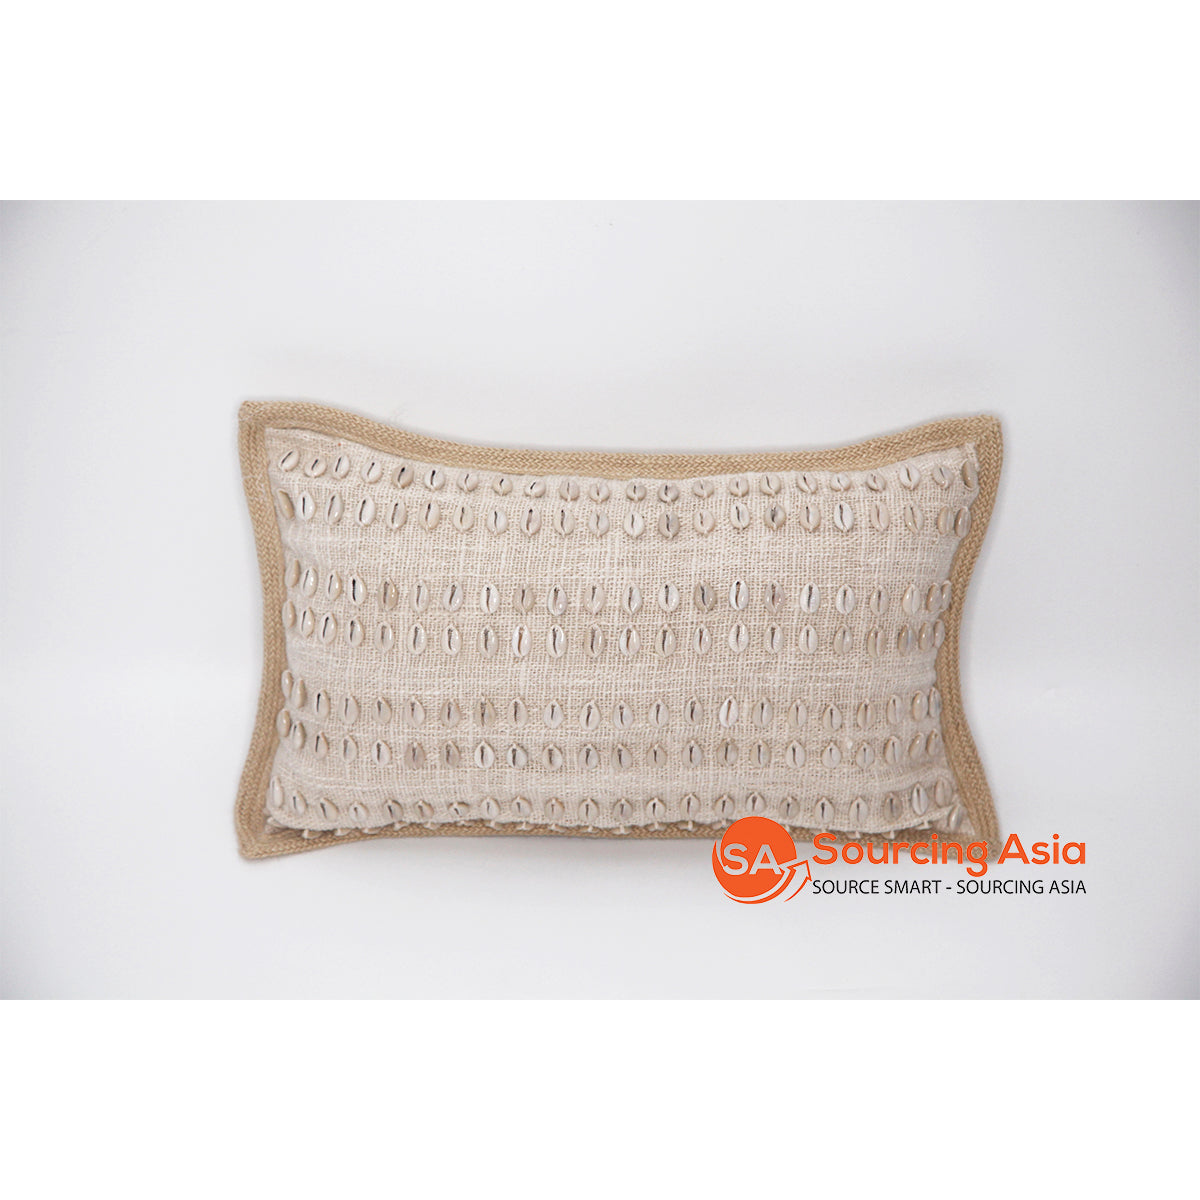 MAC027 RECTANGULAR NATURAL RAW COTTON CUSHION COVER WITH SHELL DECORATION